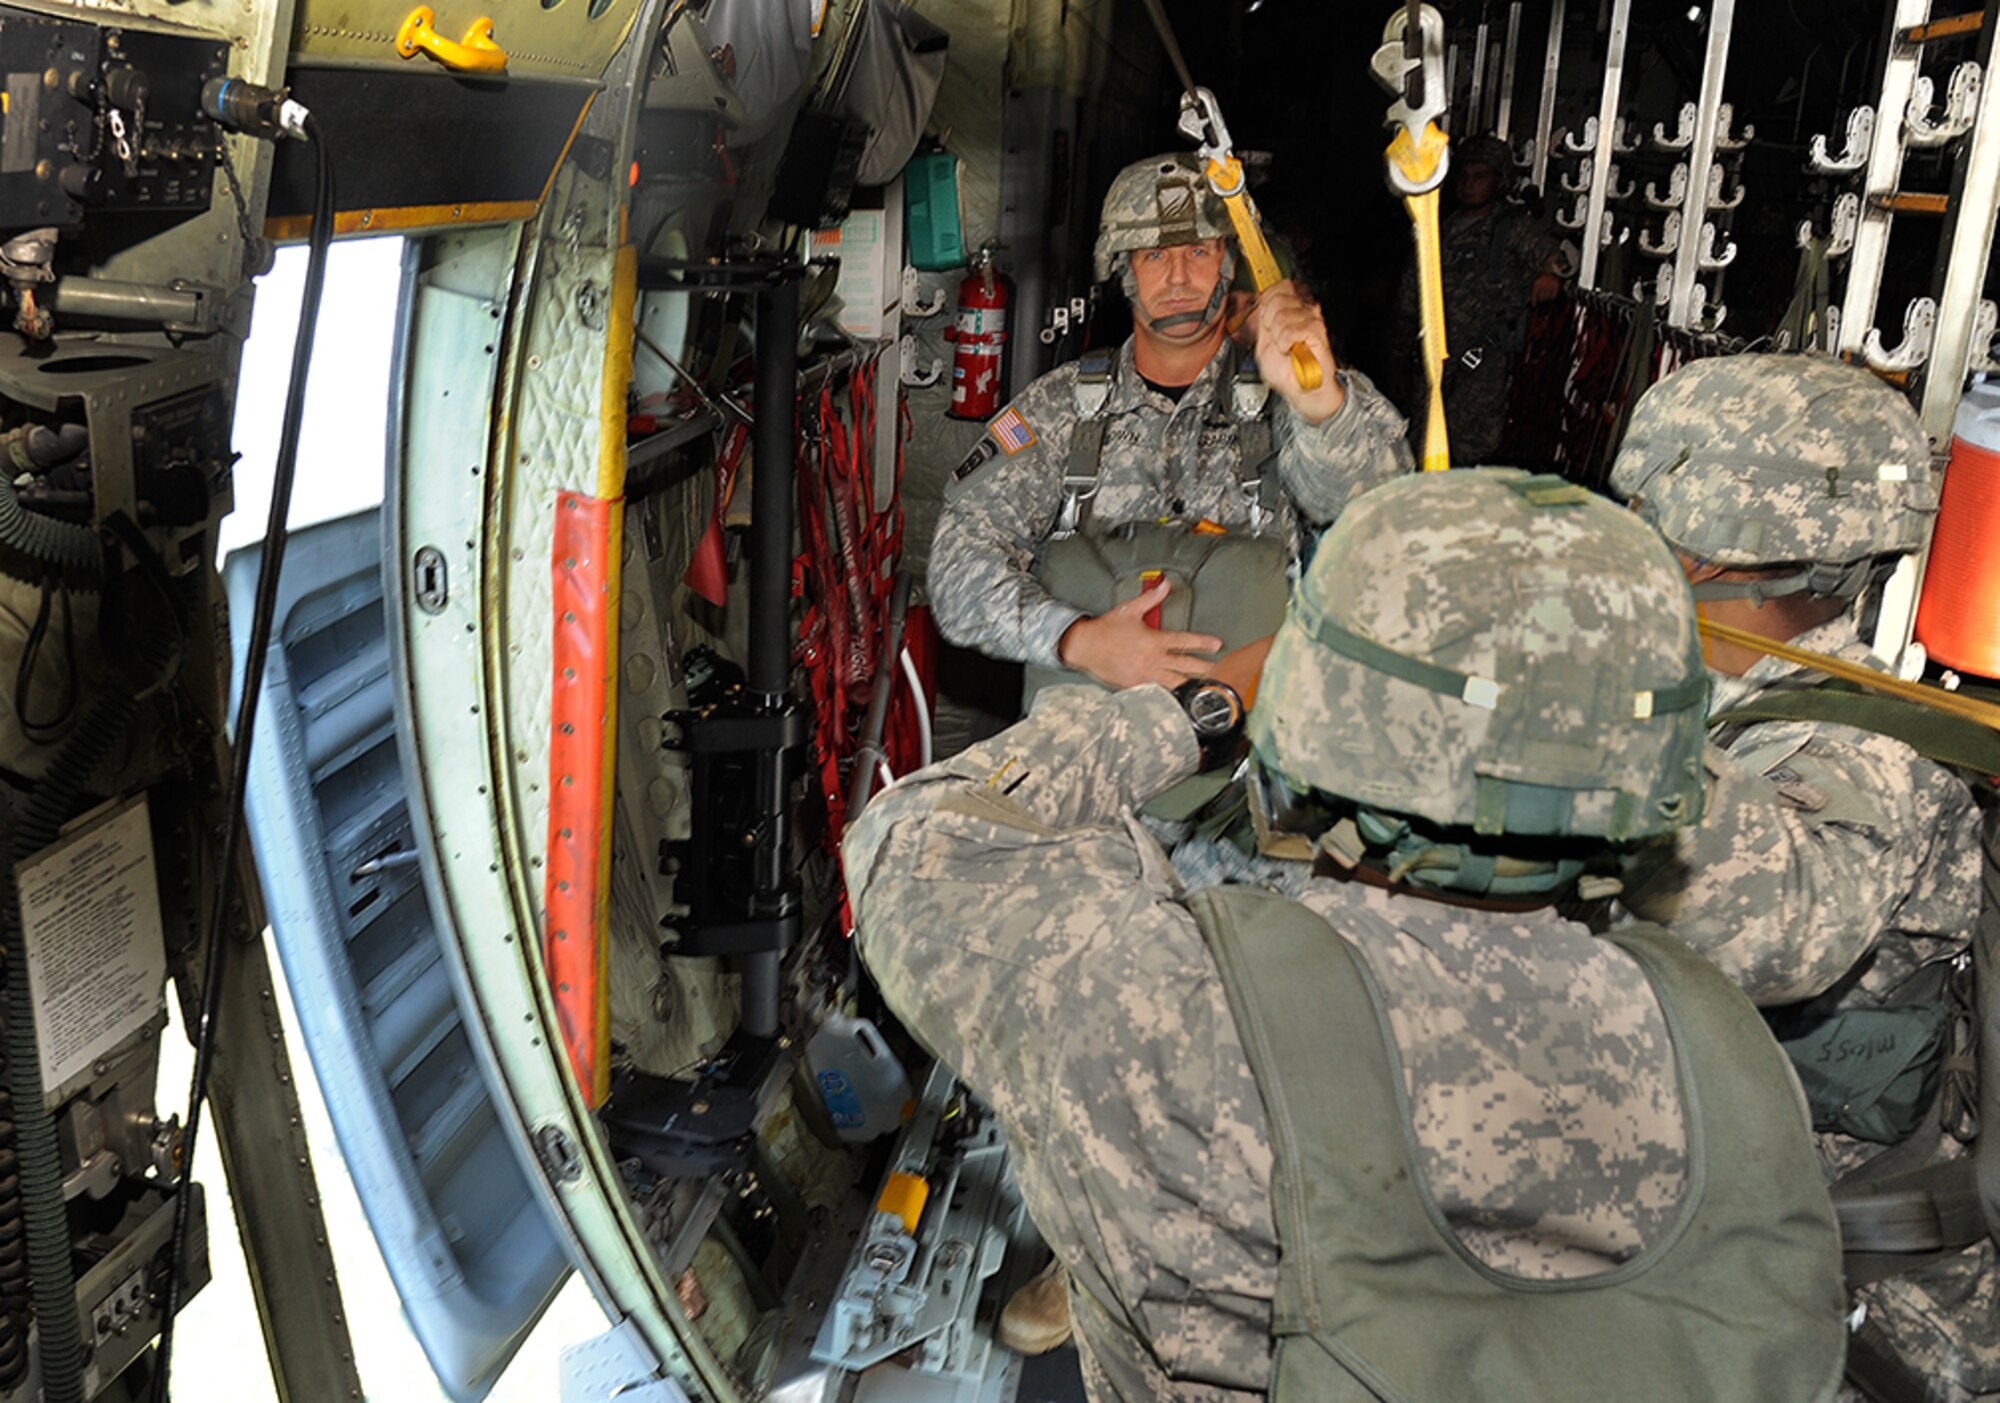 Lt. Col. Korey Brown, commander of 1st Battalion, 507th Parachute Infantry Regiment, the airborne school training unit, prepares to exit the aircraft. (Photo by Lt. Col. Jerry Lobb)